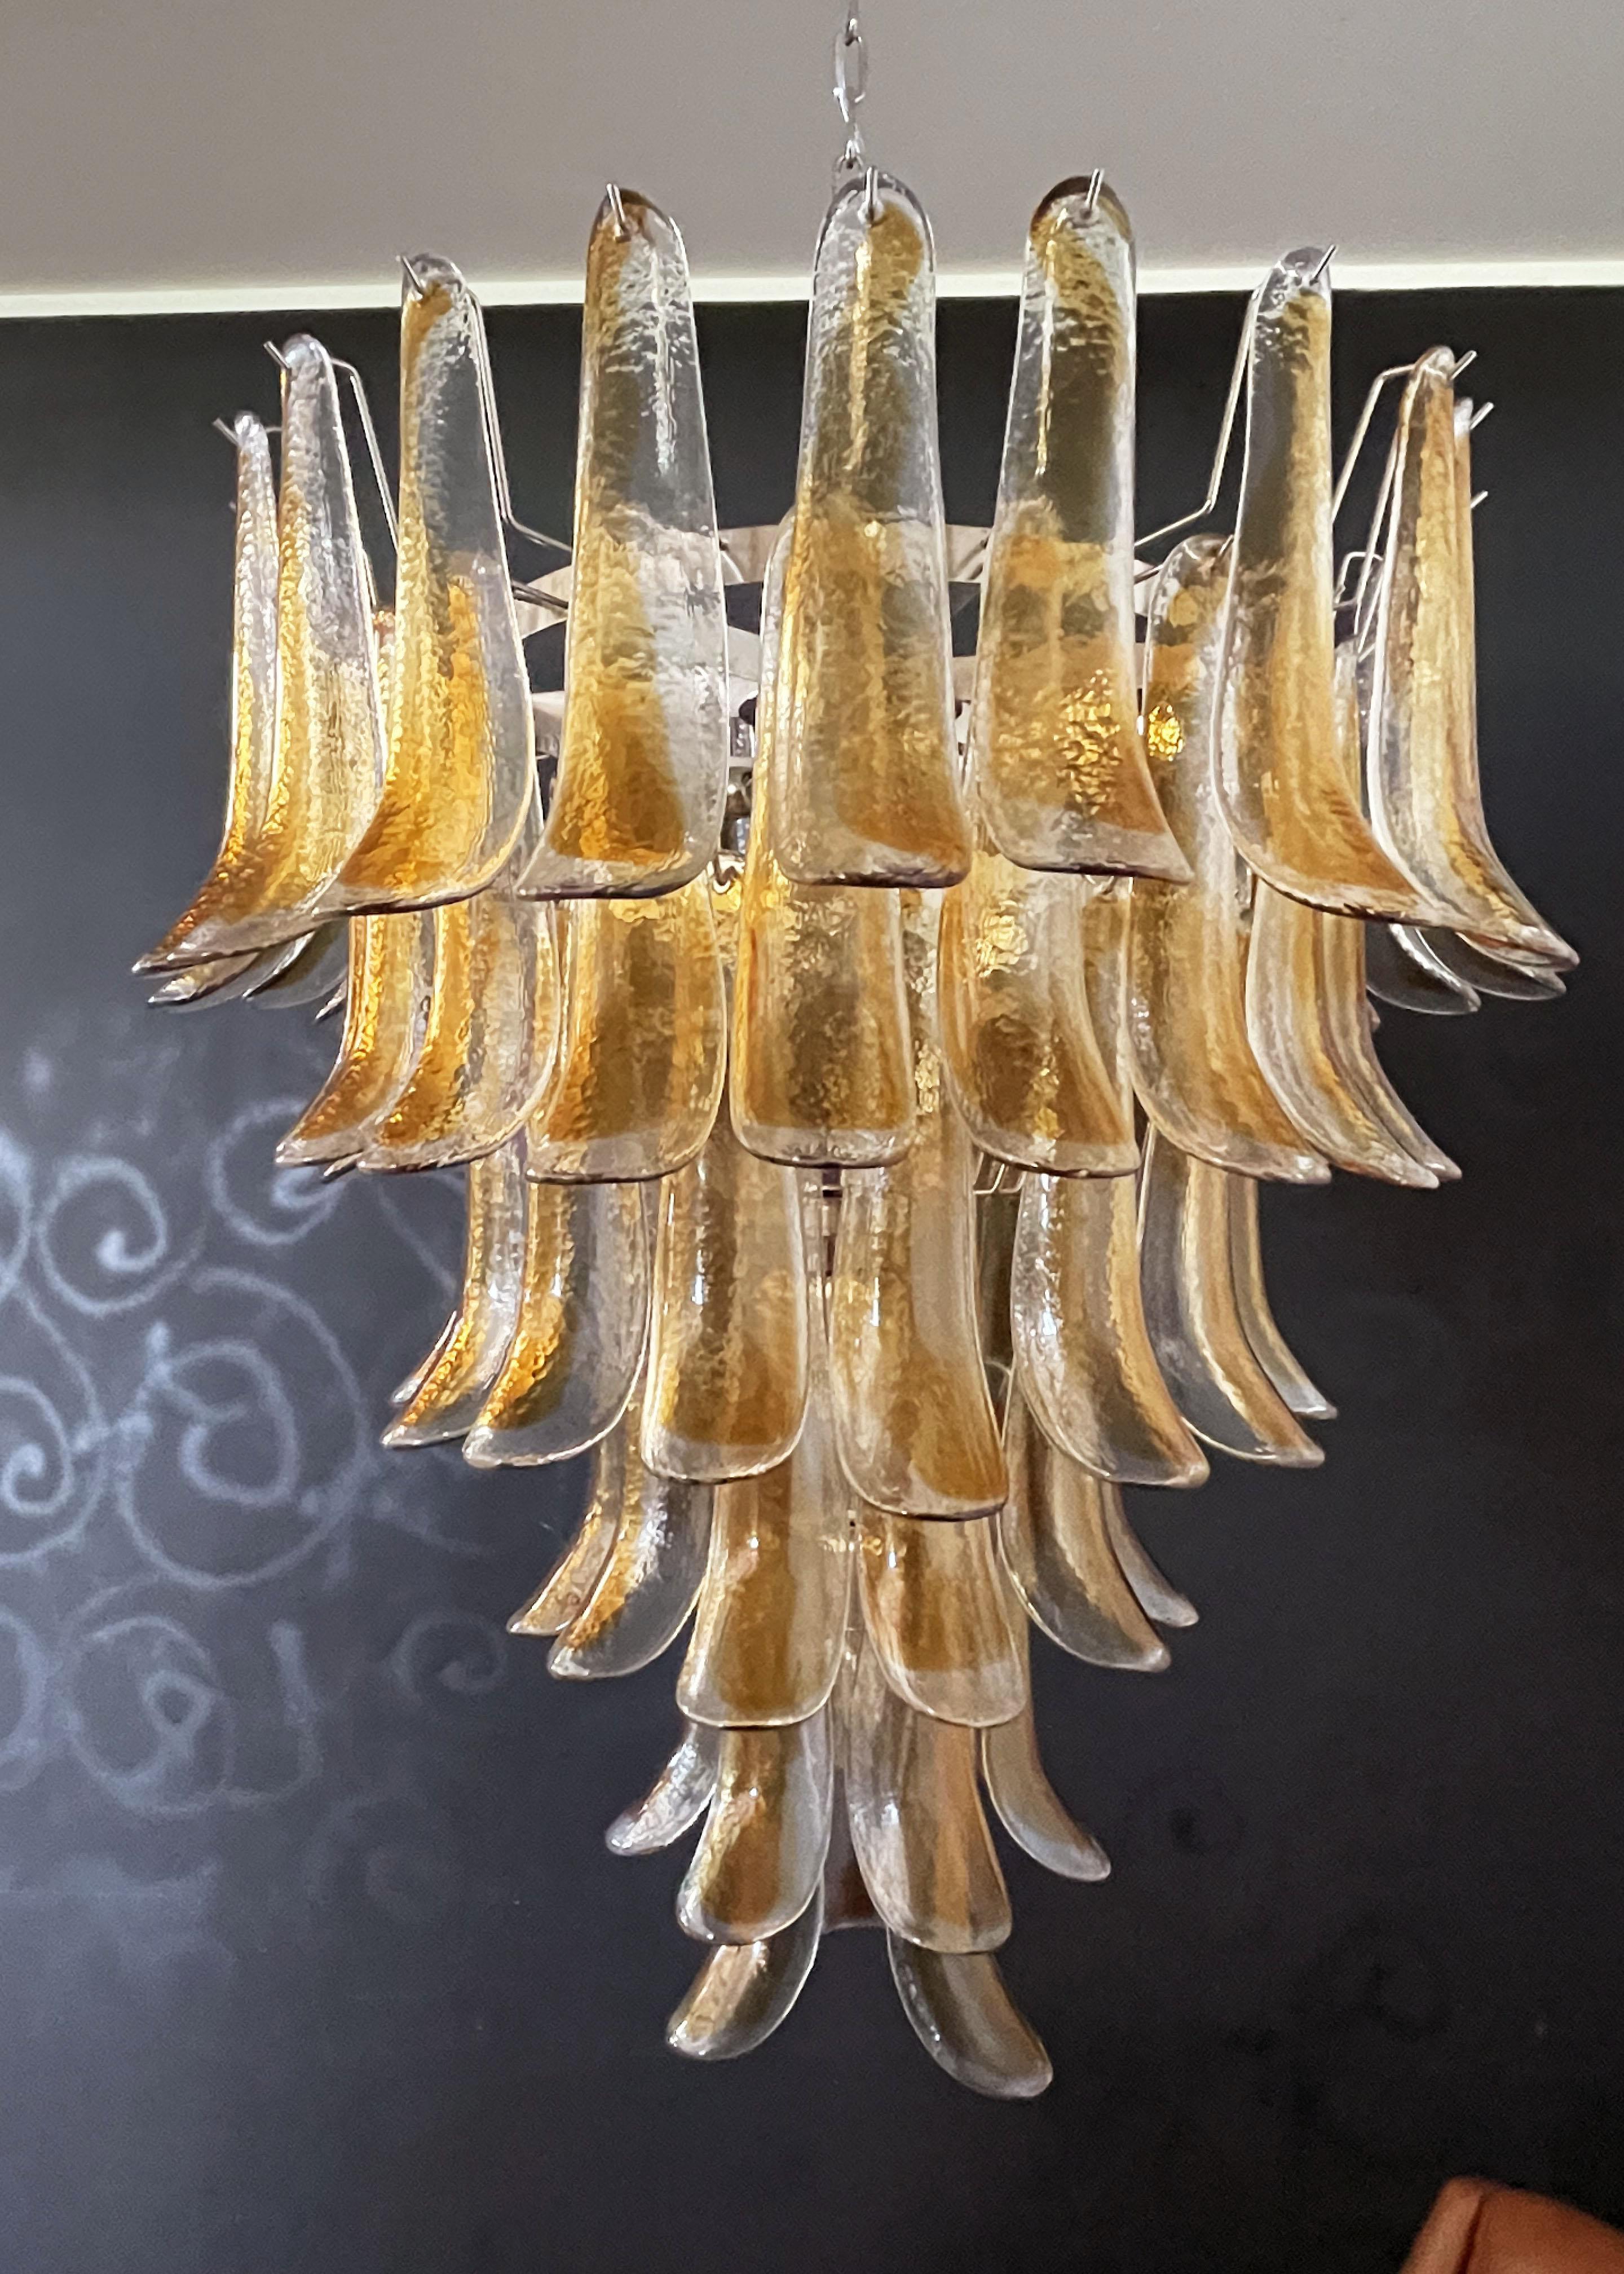 Huge Italian vintage Murano chandelier made by 75 glass petals transparent with an amber spot inside, nickel metal structure. The glasses are very high quality, the photos do not do the beauty, luster of these glasses.
Period: late XX